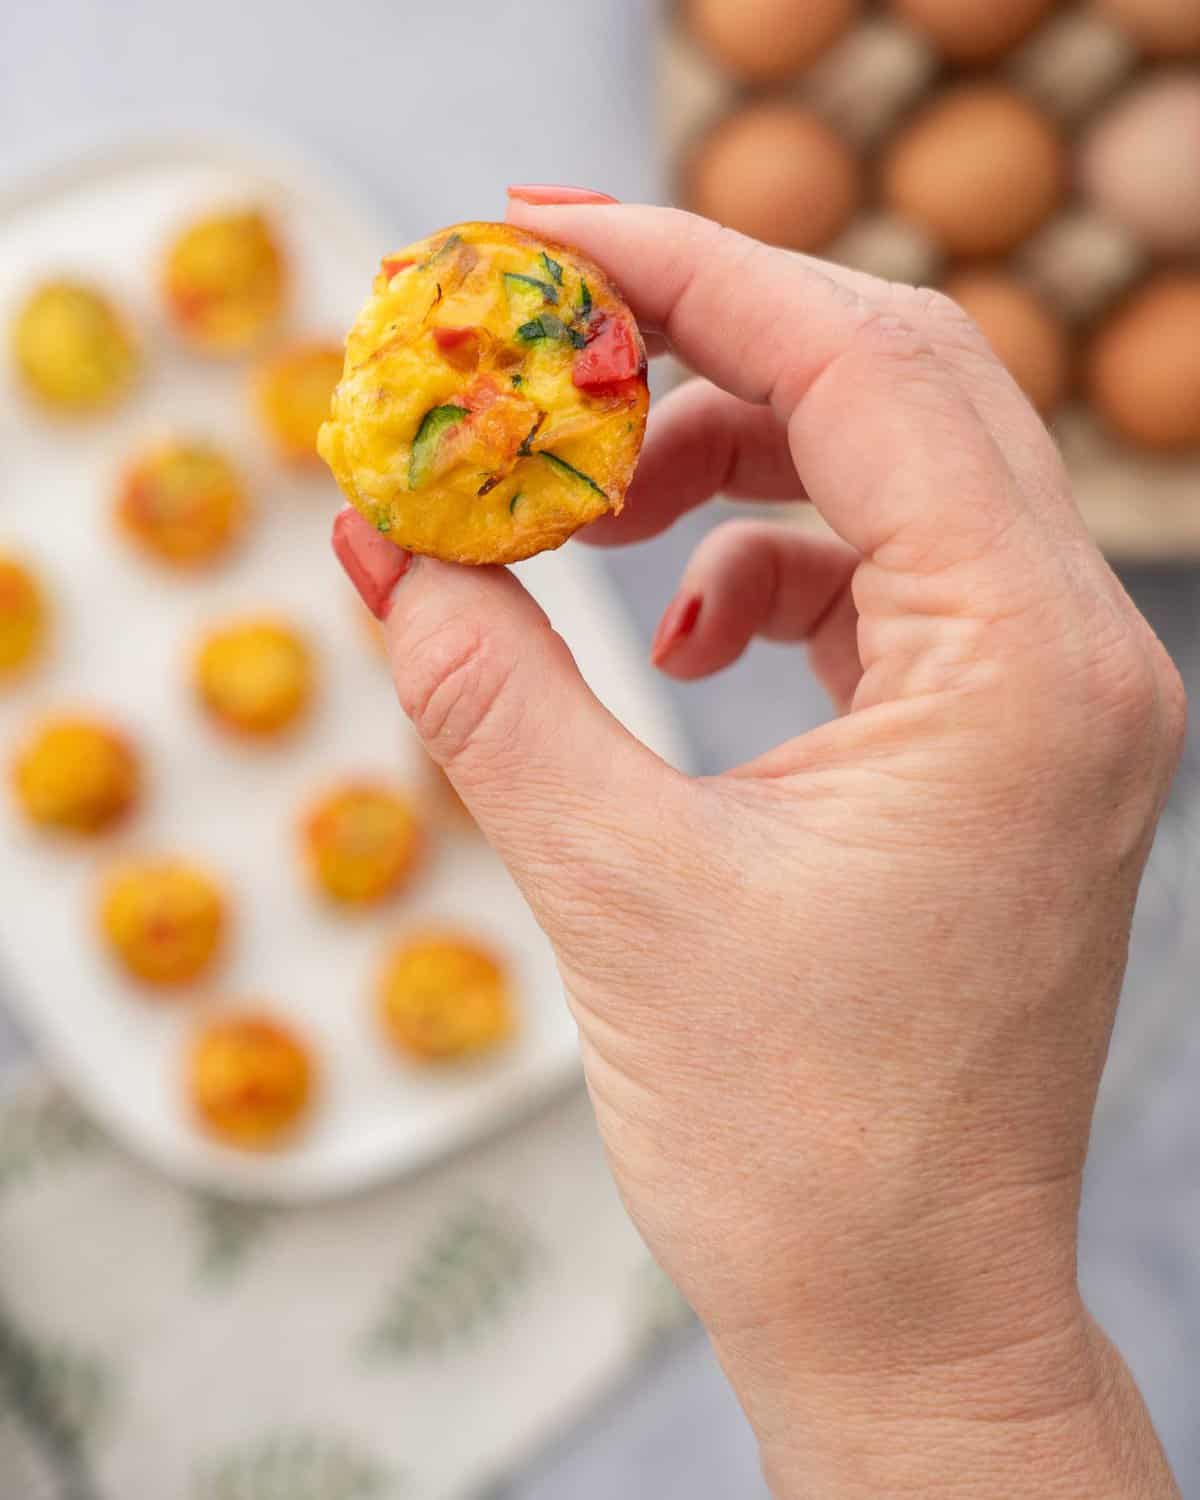 Breakfast Egg Muffins - My Kids Lick The Bowl